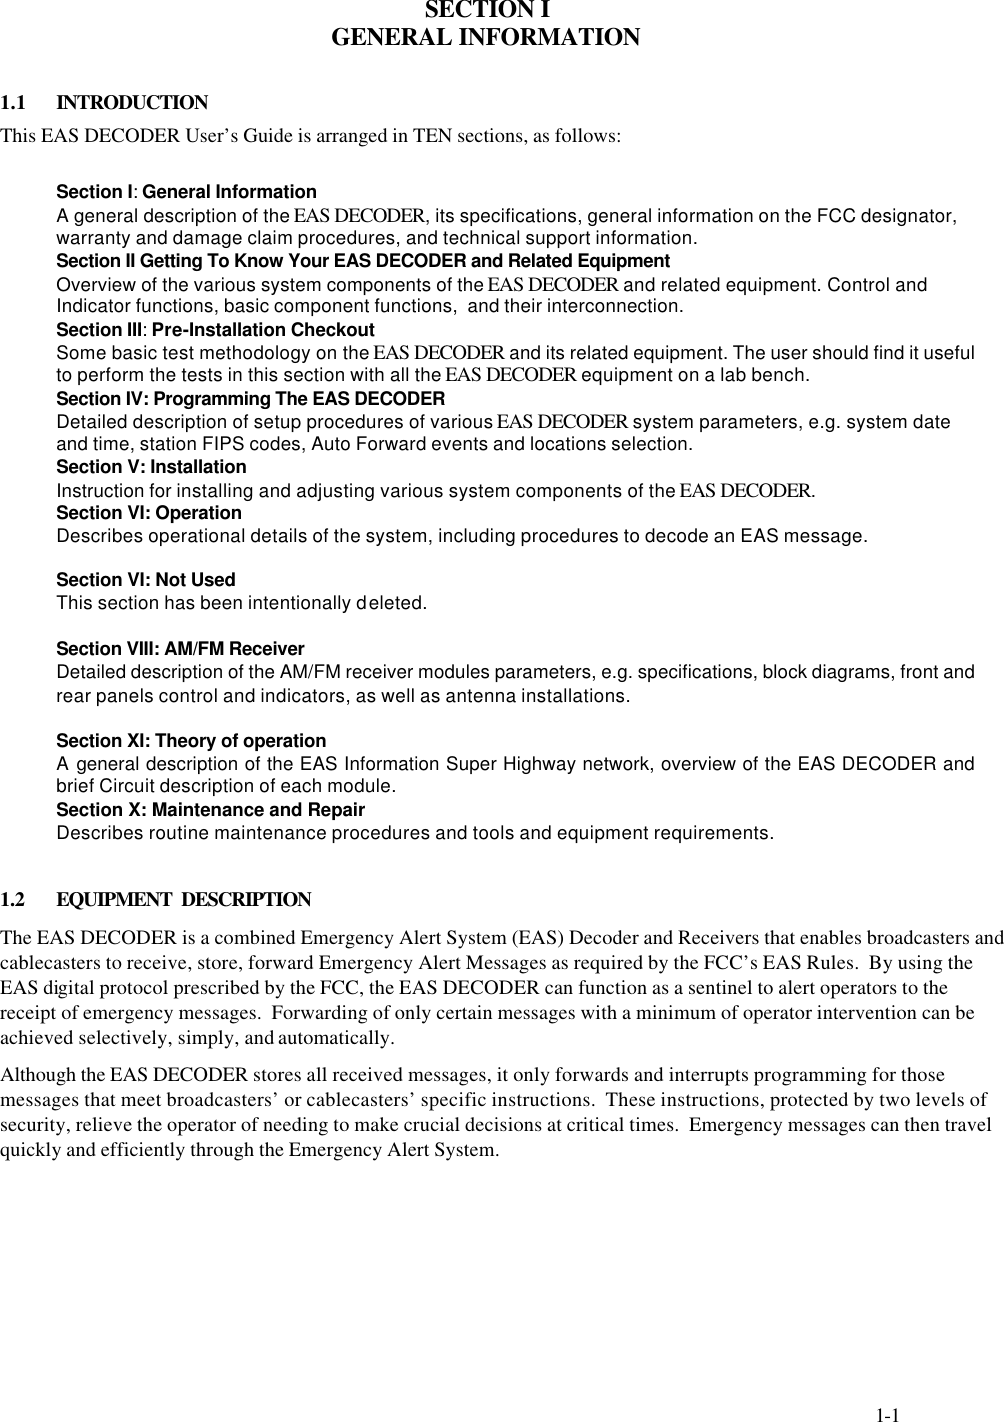     1-1    SECTION I GENERAL INFORMATION  1.1  INTRODUCTION This EAS DECODER User’s Guide is arranged in TEN sections, as follows:  Section I: General Information A general description of the EAS DECODER, its specifications, general information on the FCC designator, warranty and damage claim procedures, and technical support information. Section II Getting To Know Your EAS DECODER and Related Equipment Overview of the various system components of the EAS DECODER and related equipment. Control and Indicator functions, basic component functions,  and their interconnection. Section III: Pre-Installation Checkout Some basic test methodology on the EAS DECODER and its related equipment. The user should find it useful to perform the tests in this section with all the EAS DECODER equipment on a lab bench. Section IV: Programming The EAS DECODER Detailed description of setup procedures of various EAS DECODER system parameters, e.g. system date and time, station FIPS codes, Auto Forward events and locations selection. Section V: Installation Instruction for installing and adjusting various system components of the EAS DECODER. Section VI: Operation Describes operational details of the system, including procedures to decode an EAS message.              Section VI: Not Used This section has been intentionally deleted.  Section VIII: AM/FM Receiver Detailed description of the AM/FM receiver modules parameters, e.g. specifications, block diagrams, front and rear panels control and indicators, as well as antenna installations.  Section XI: Theory of operation A general description of the EAS Information Super Highway network, overview of the EAS DECODER and brief Circuit description of each module. Section X: Maintenance and Repair  Describes routine maintenance procedures and tools and equipment requirements.  1.2 EQUIPMENT  DESCRIPTION The EAS DECODER is a combined Emergency Alert System (EAS) Decoder and Receivers that enables broadcasters and cablecasters to receive, store, forward Emergency Alert Messages as required by the FCC’s EAS Rules.  By using the  EAS digital protocol prescribed by the FCC, the EAS DECODER can function as a sentinel to alert operators to the receipt of emergency messages.  Forwarding of only certain messages with a minimum of operator intervention can be achieved selectively, simply, and automatically. Although the EAS DECODER stores all received messages, it only forwards and interrupts programming for those messages that meet broadcasters’ or cablecasters’ specific instructions.  These instructions, protected by two levels of security, relieve the operator of needing to make crucial decisions at critical times.  Emergency messages can then travel quickly and efficiently through the Emergency Alert System.    